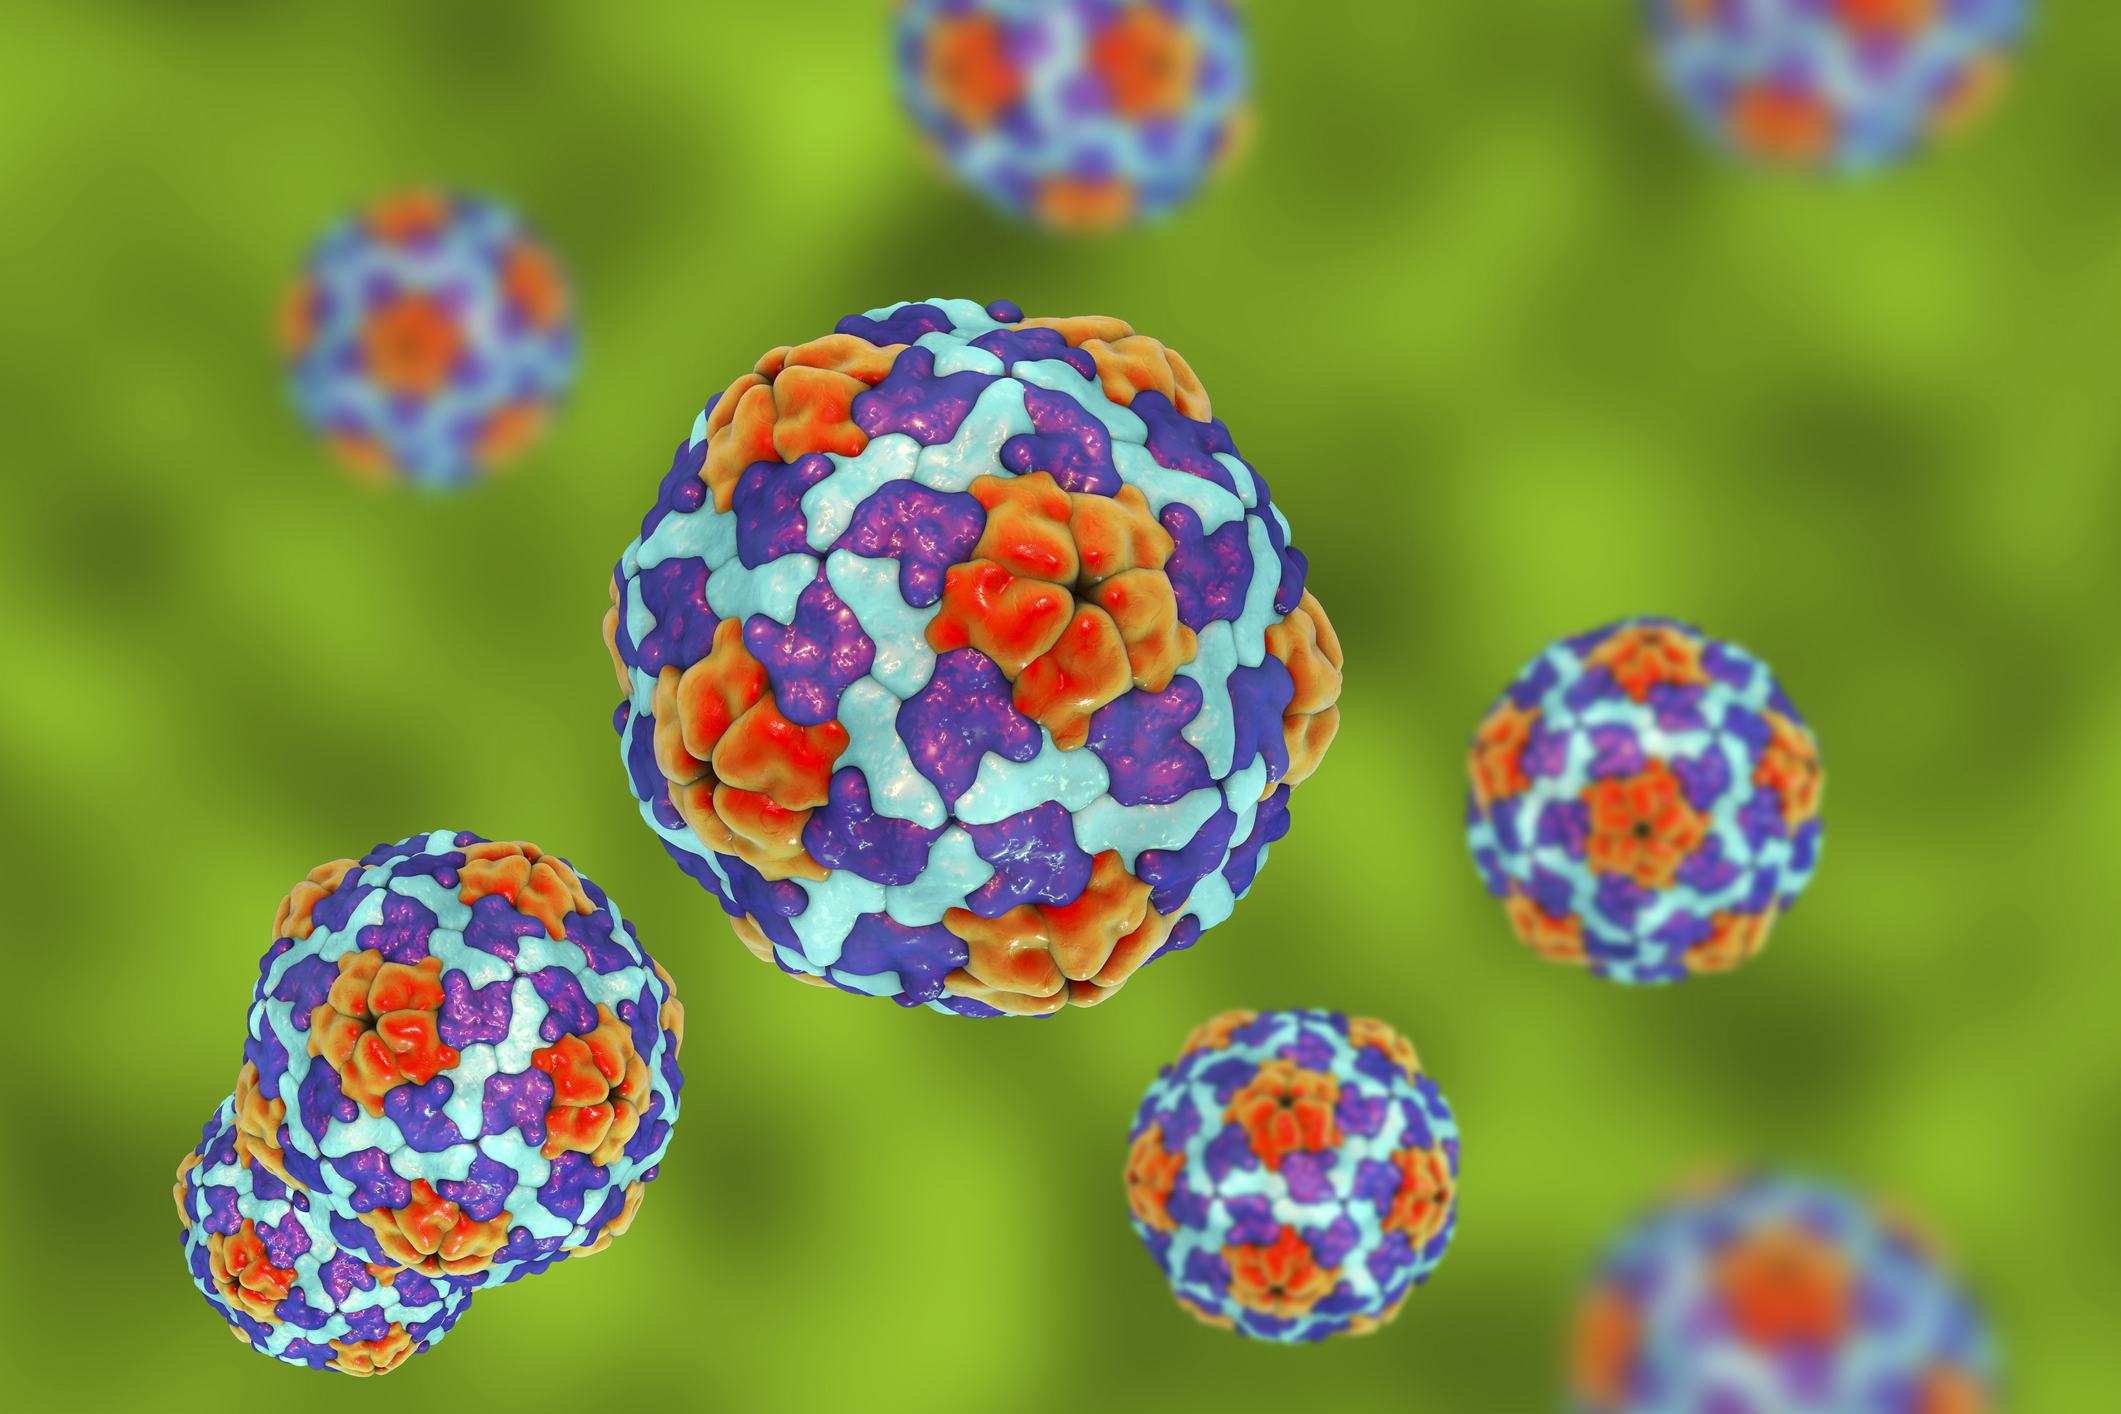 Hepatitis A Outbreak Could I Be At Risk